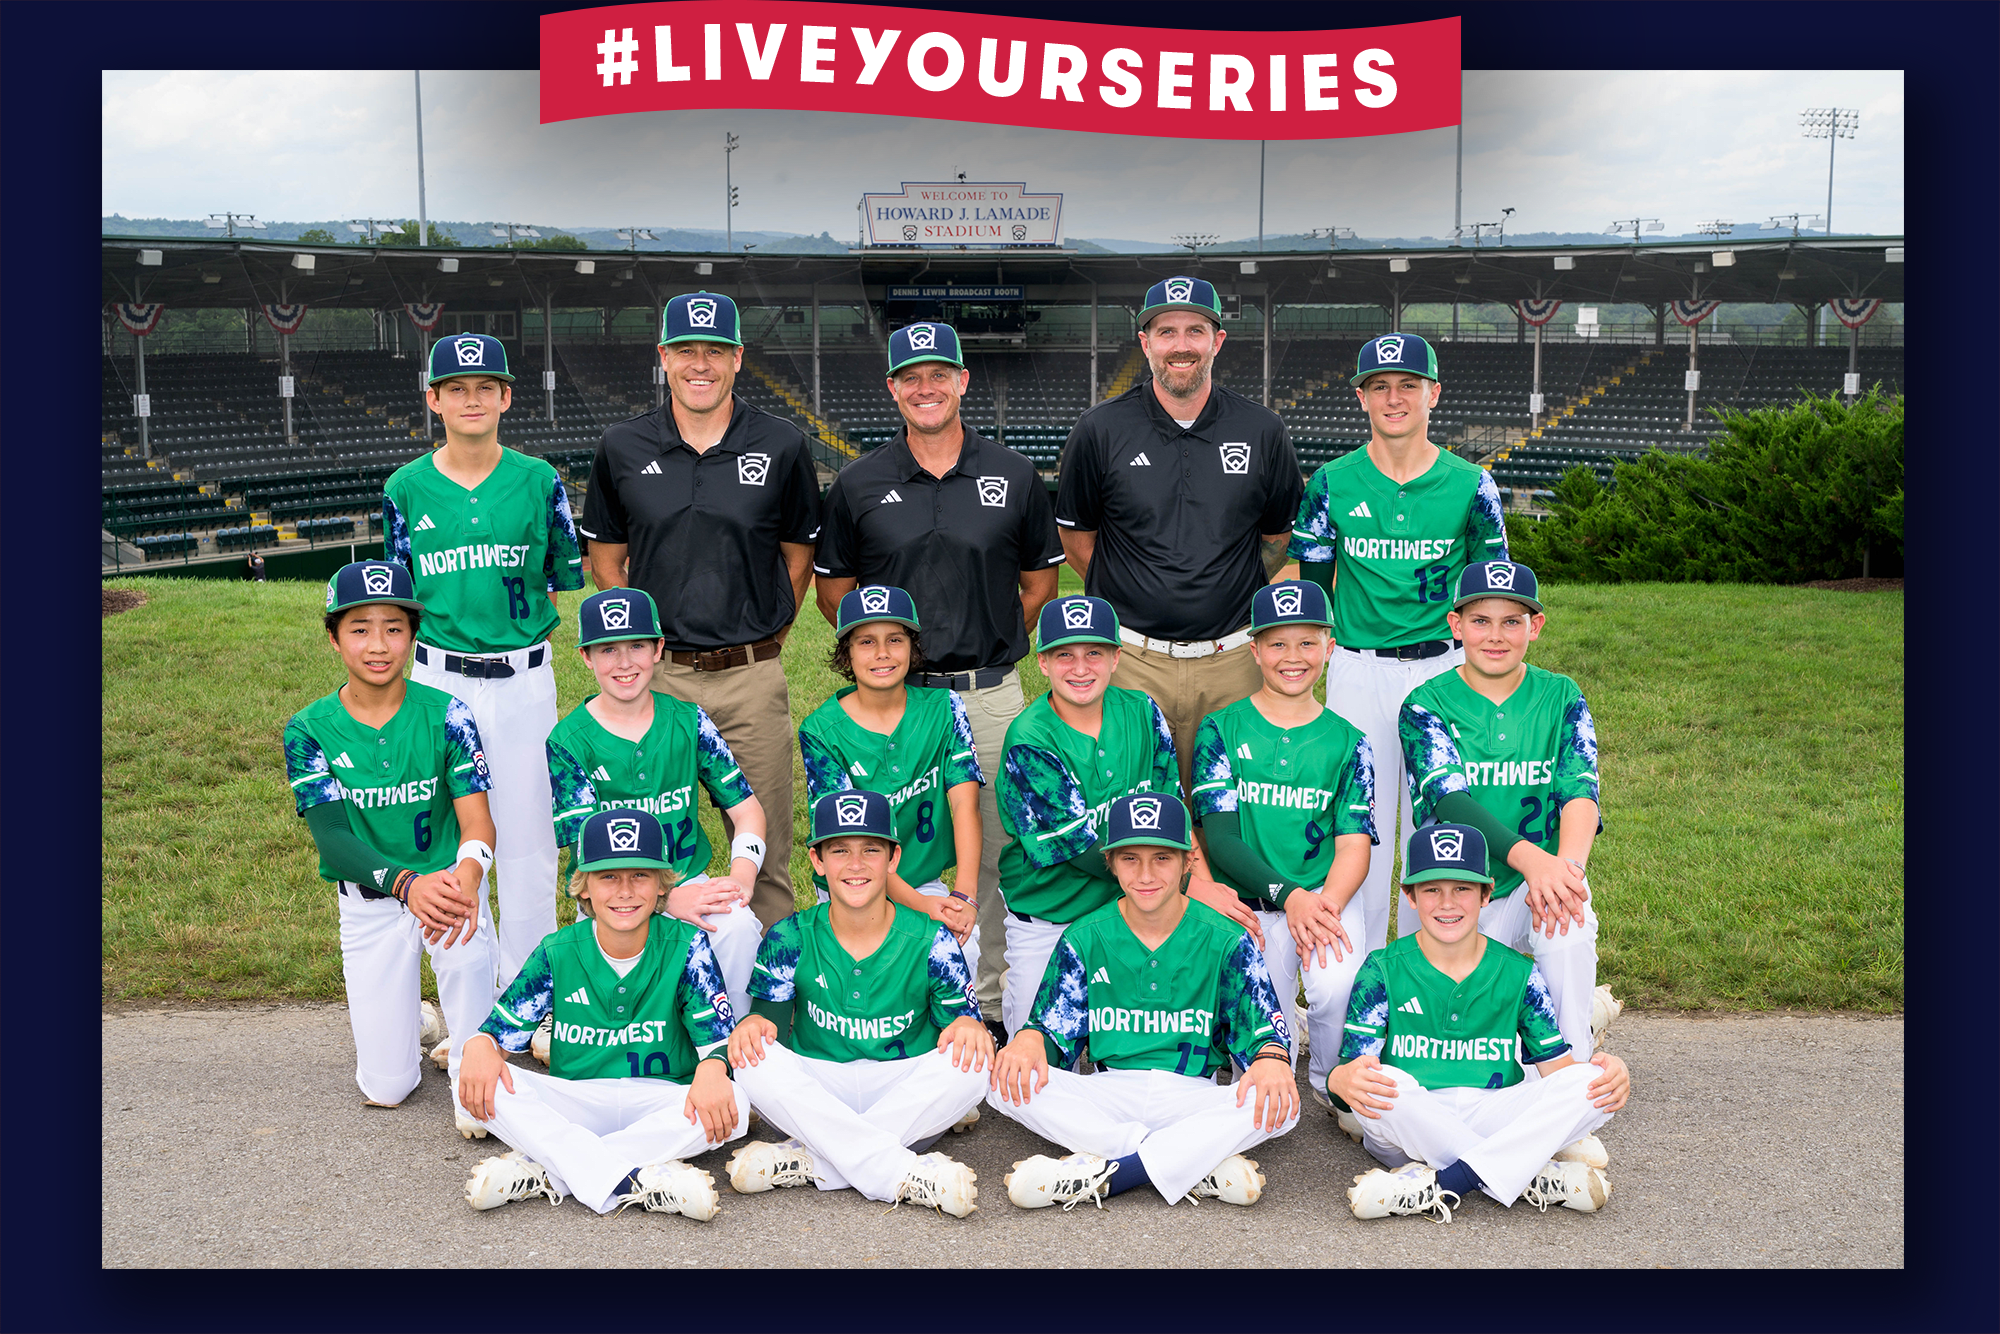 Meet the Teams 2023 Little League Baseball® World Series, Presented by T-Mobile